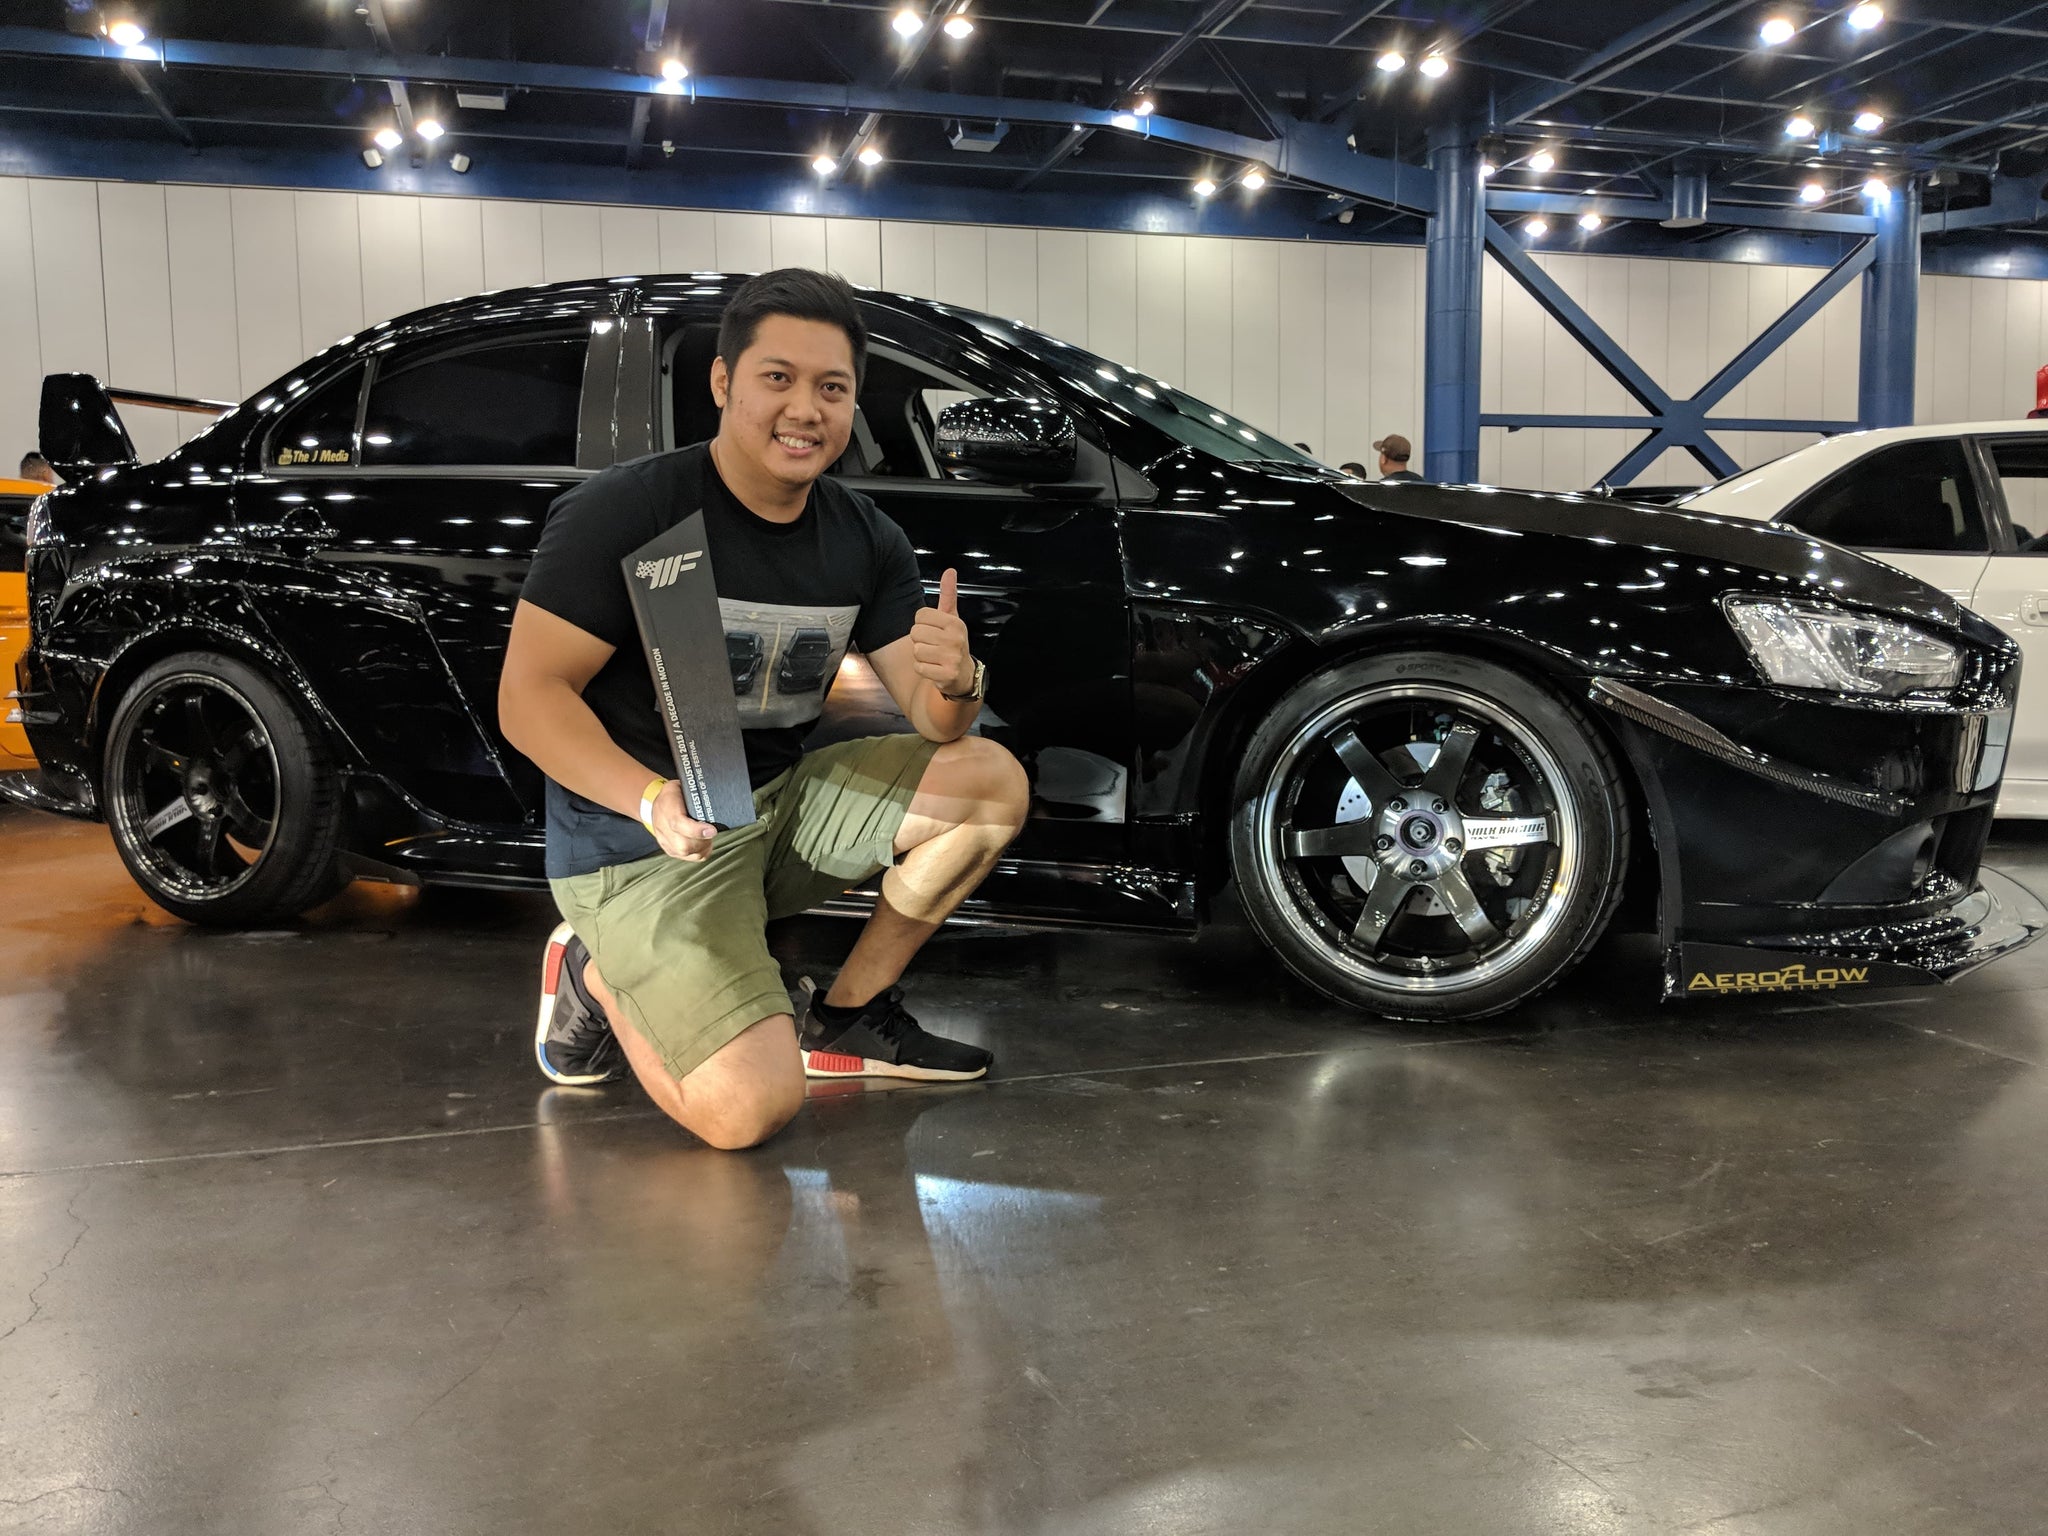 My Car Show Story